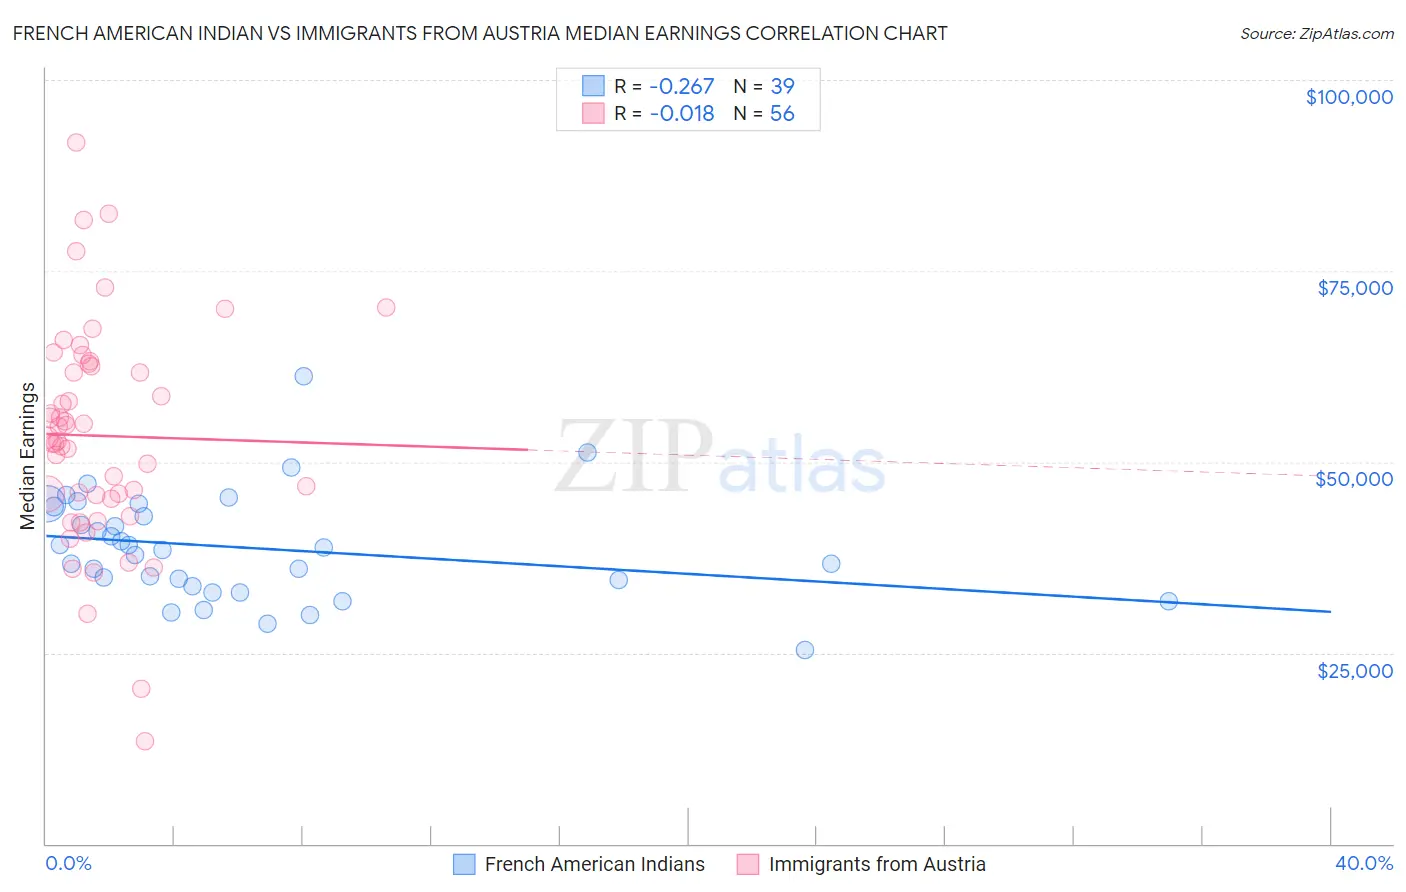 French American Indian vs Immigrants from Austria Median Earnings